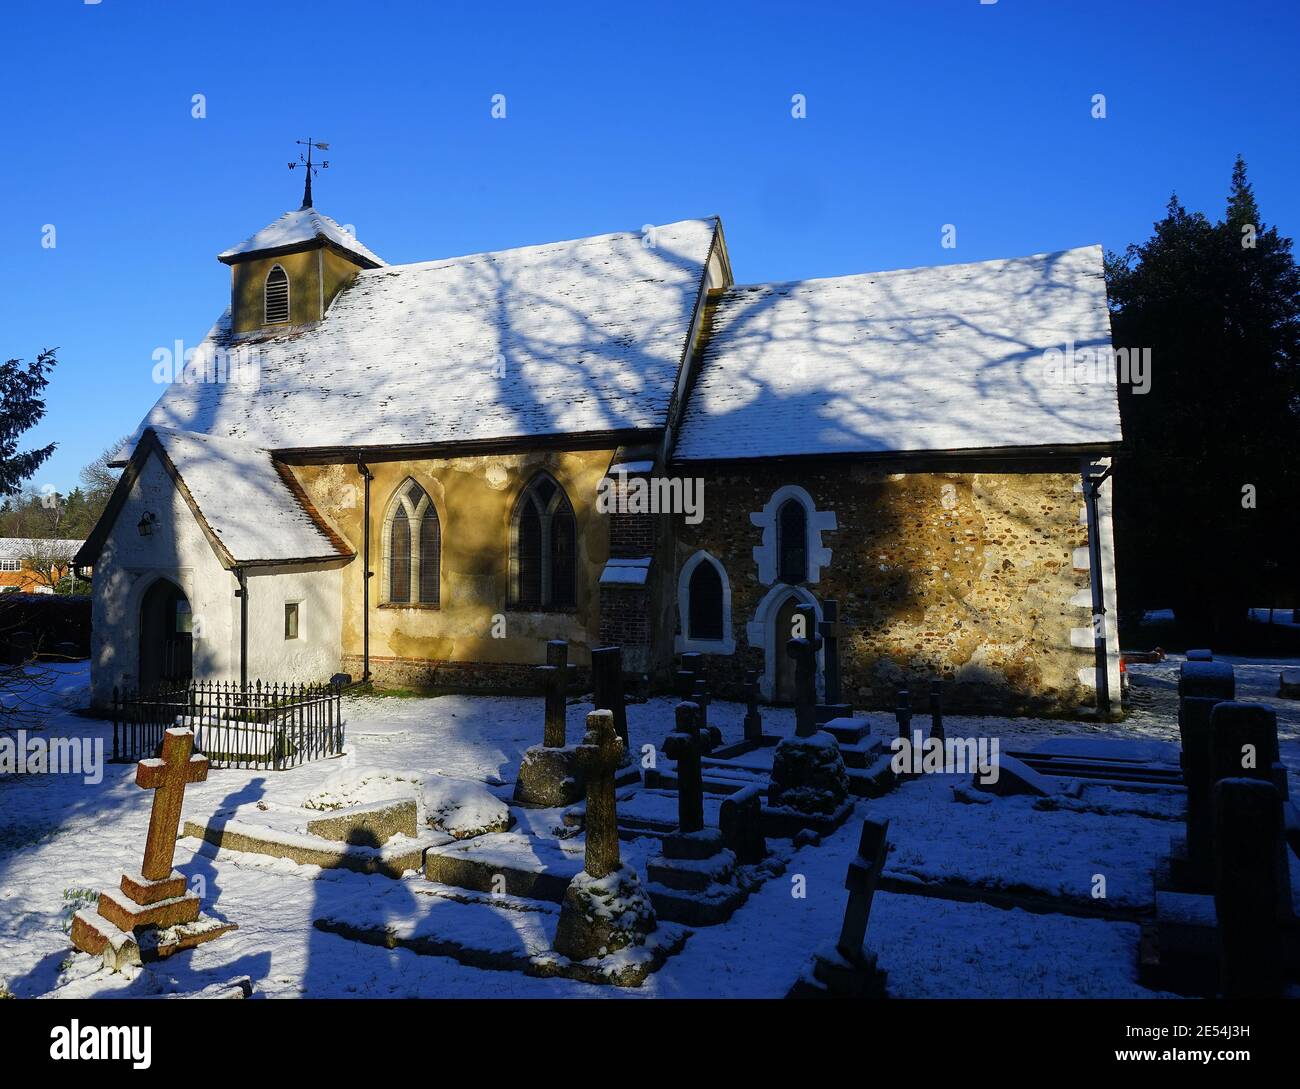 A snowy view of the Church of St Mary the Virgin, Letchworth Stock Photo